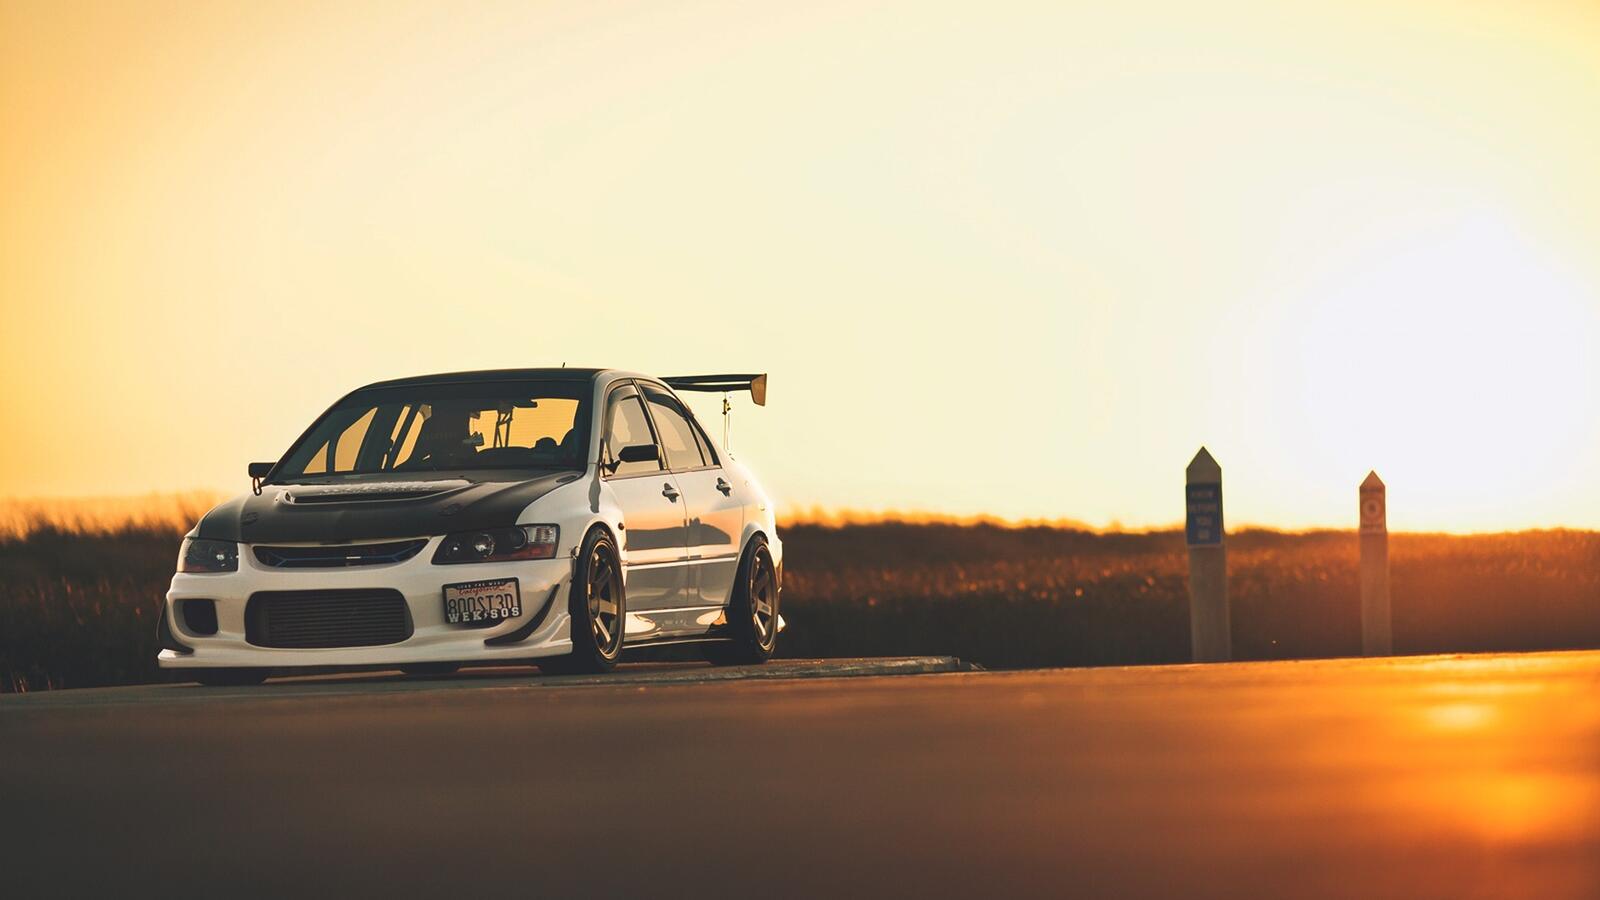 Free photo Mitsubishi evo stands on the side of the road at sunset.